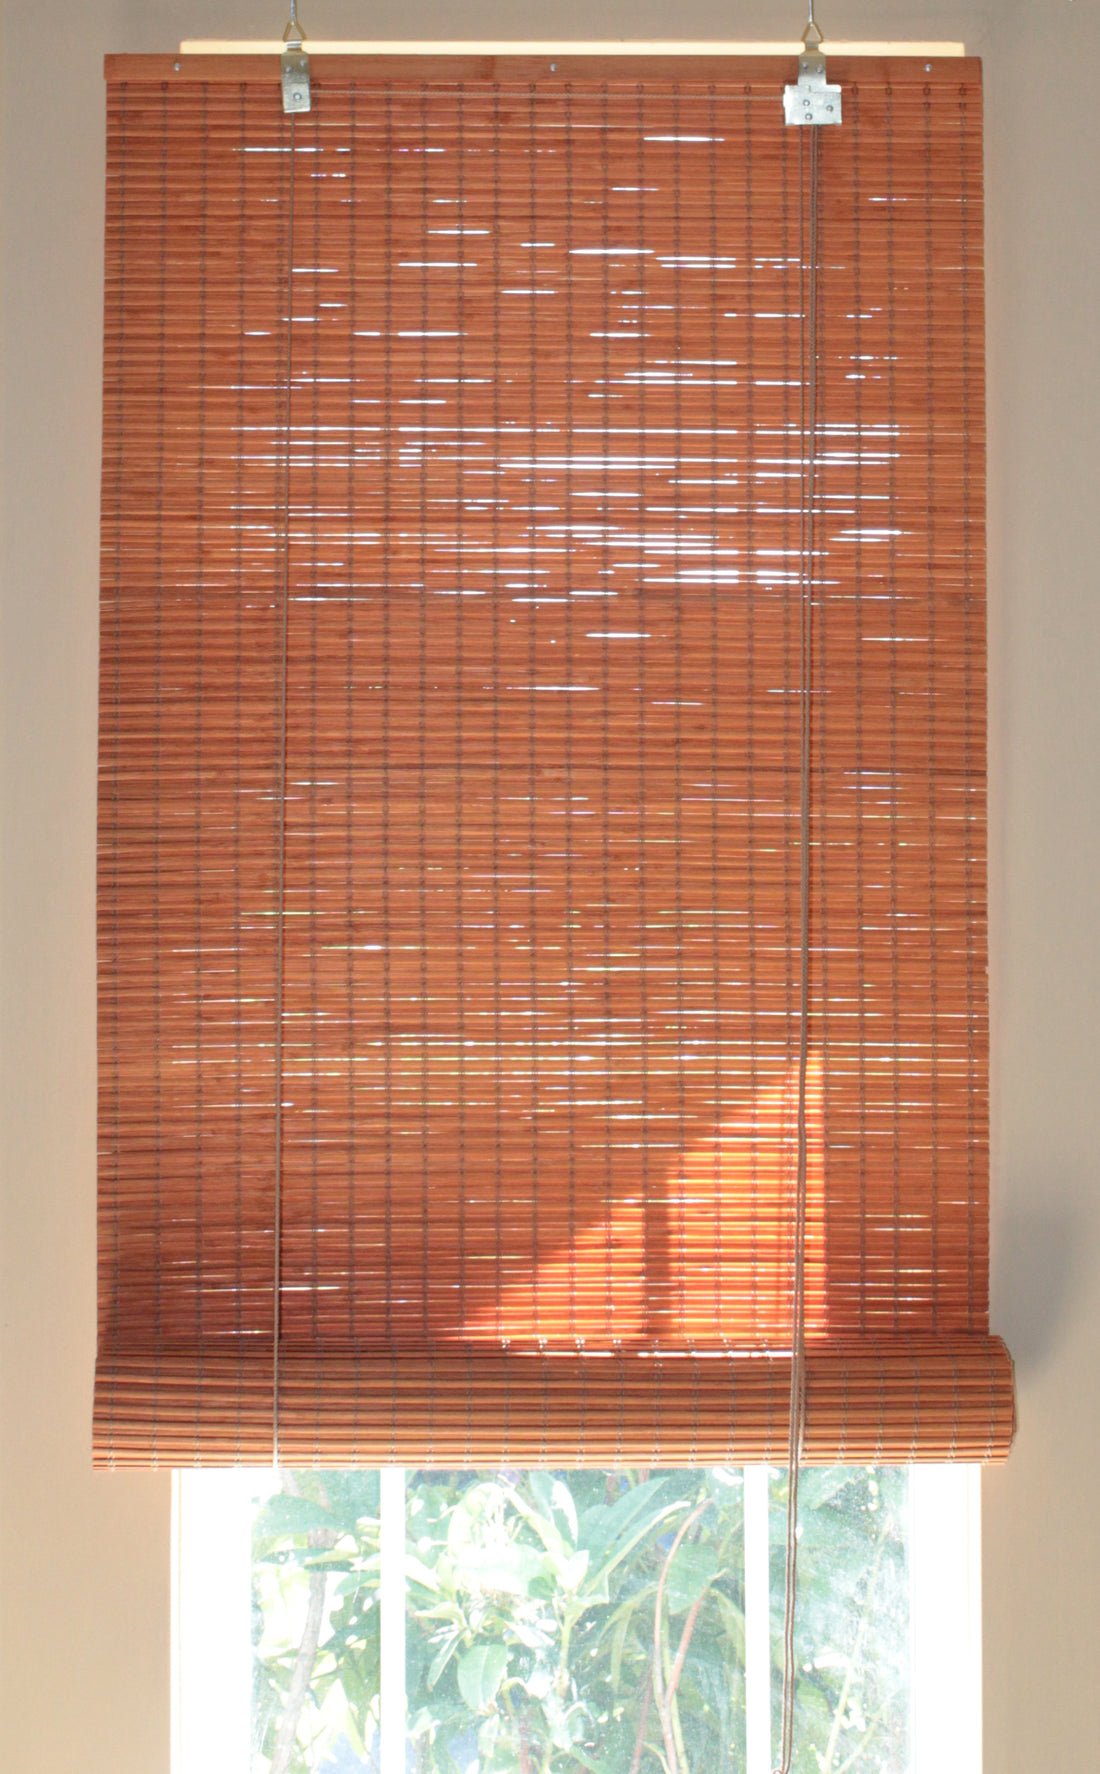 Natural real bamboo roll up blind with bamboo slats slightly overlapping each other to minimize the gap between slats